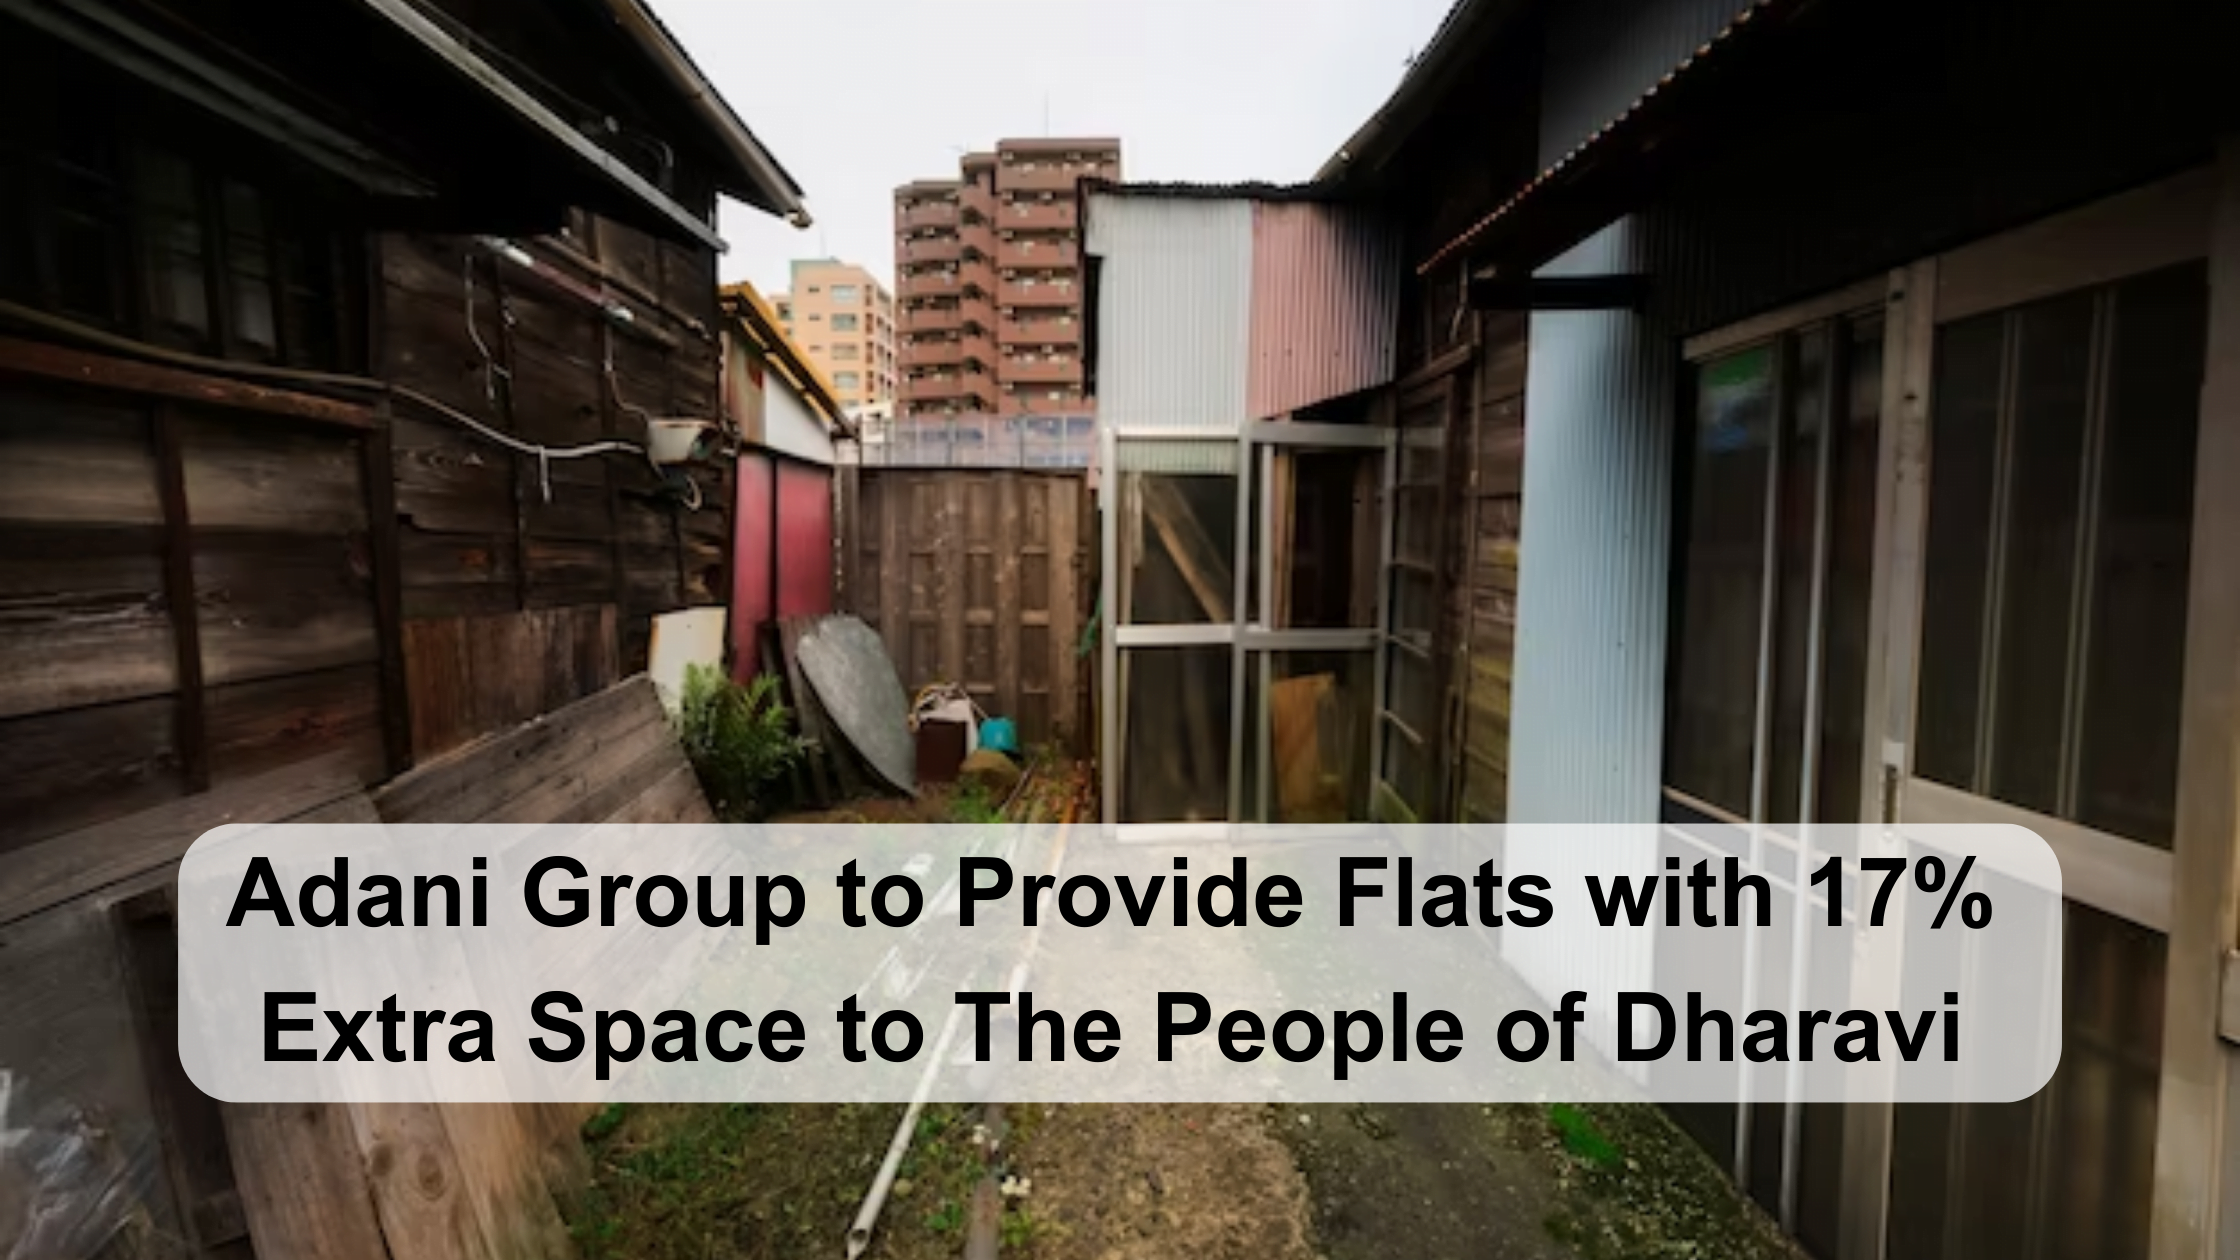 Adani Group to Provide Flats with 17% Extra Space to The People of Dharavi